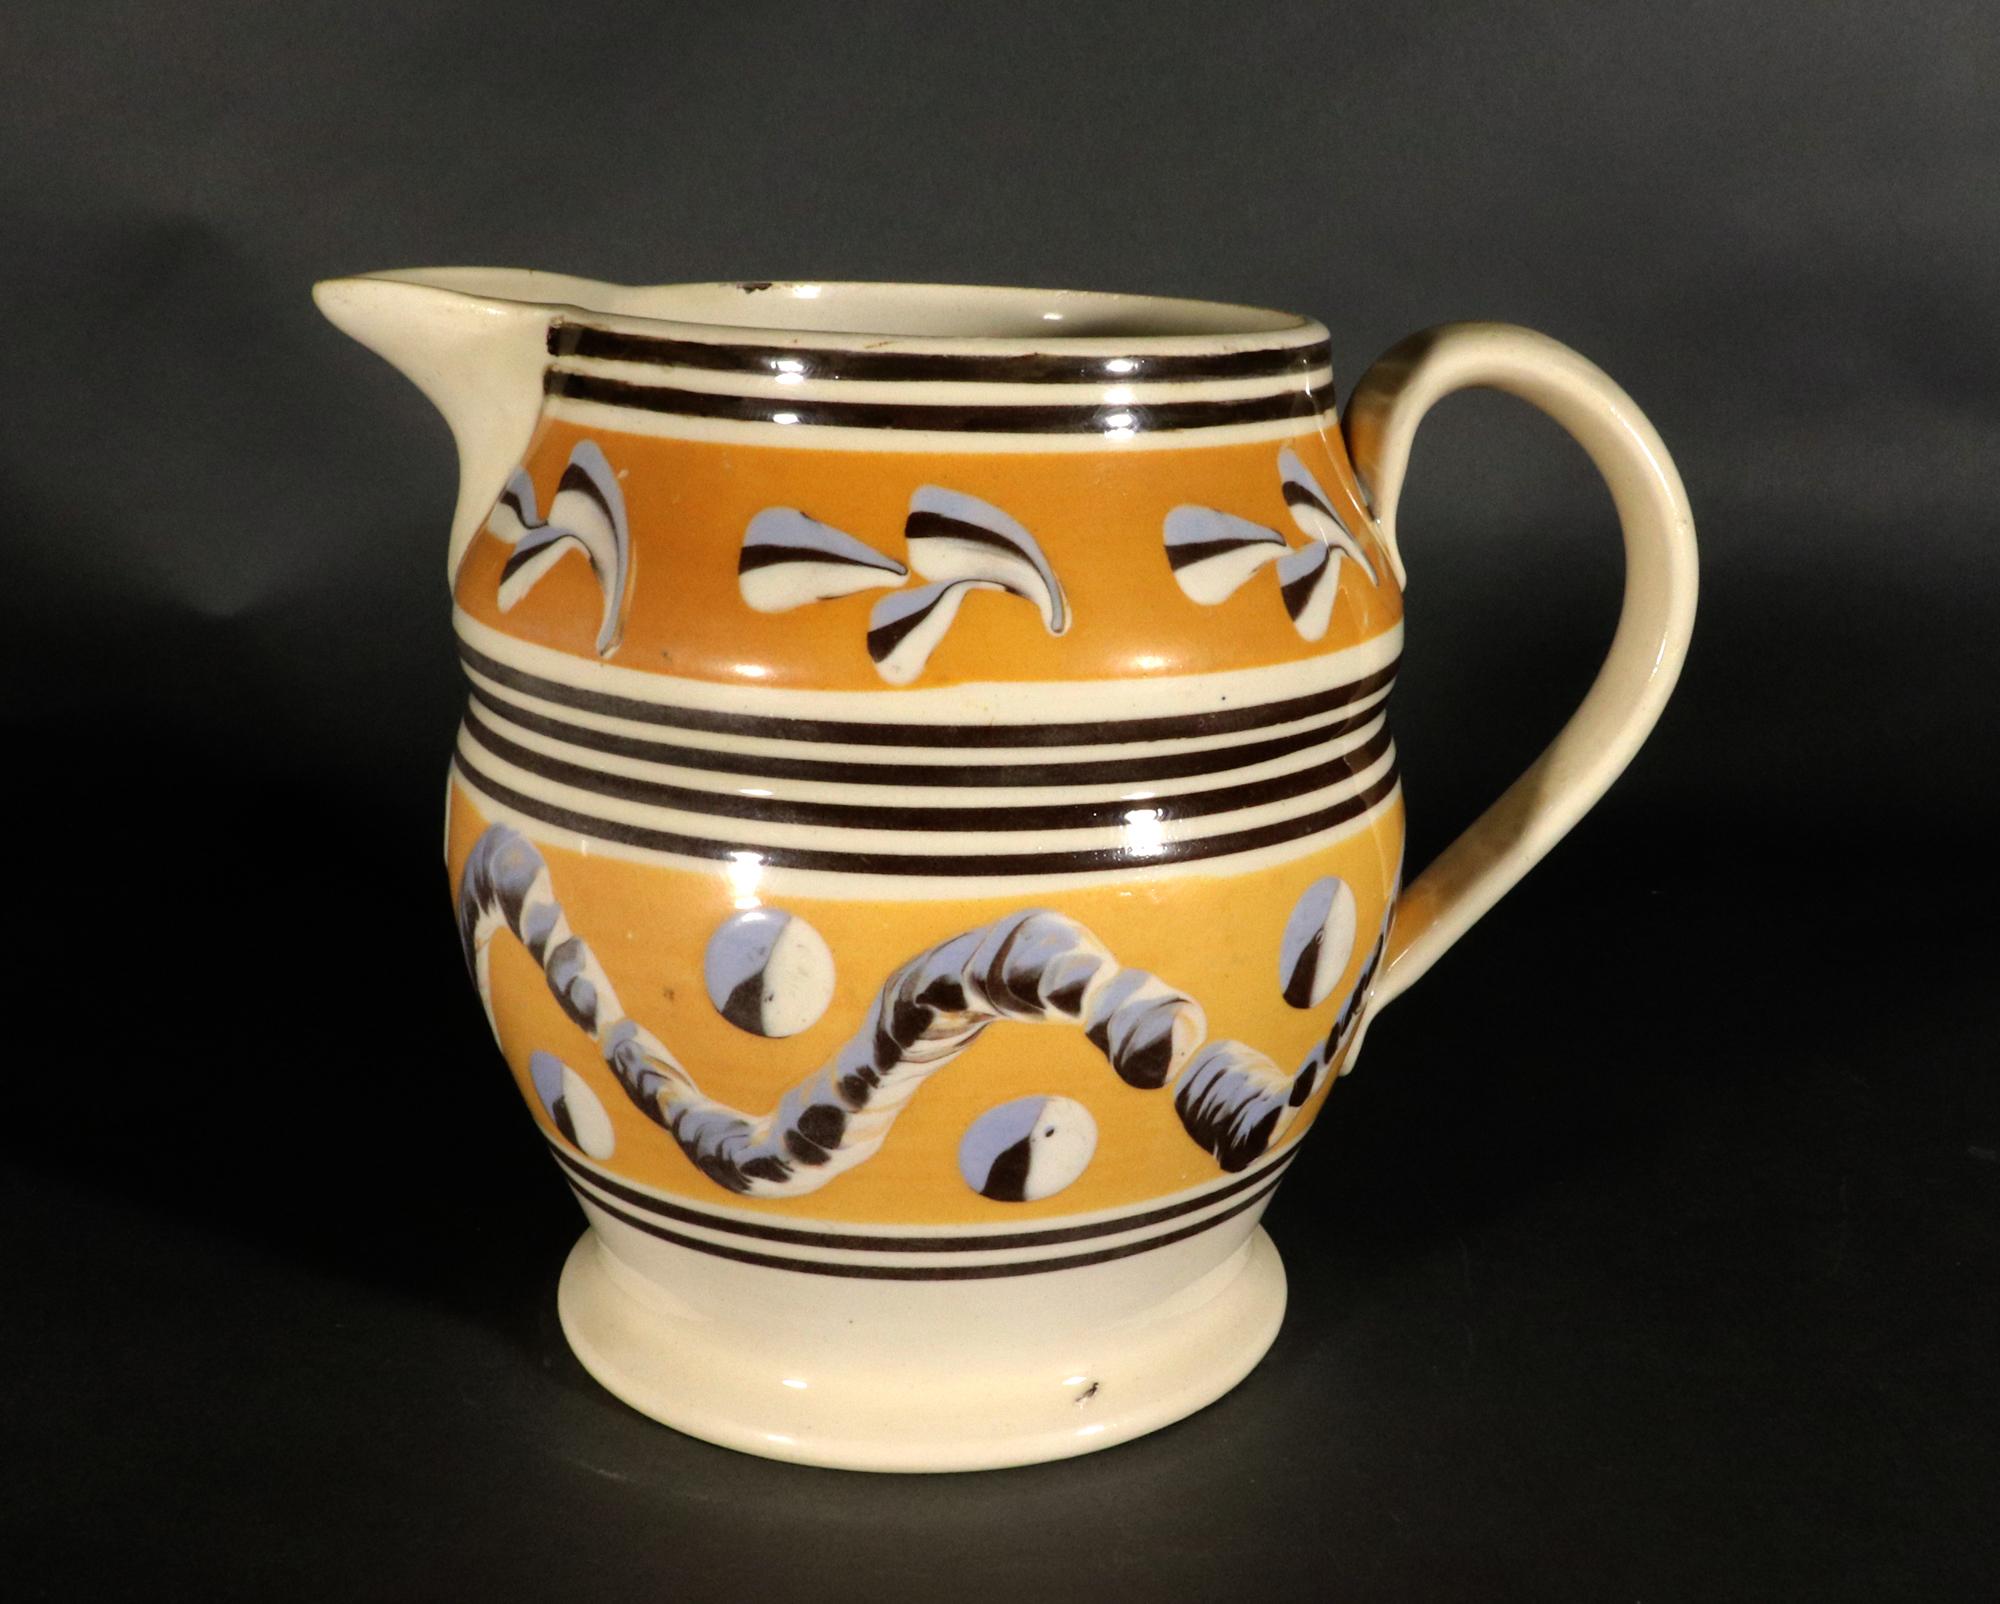 19th Century Antique English Pottery Dark Yellow Mocha Jug with Leaf, Earthworm and Dots